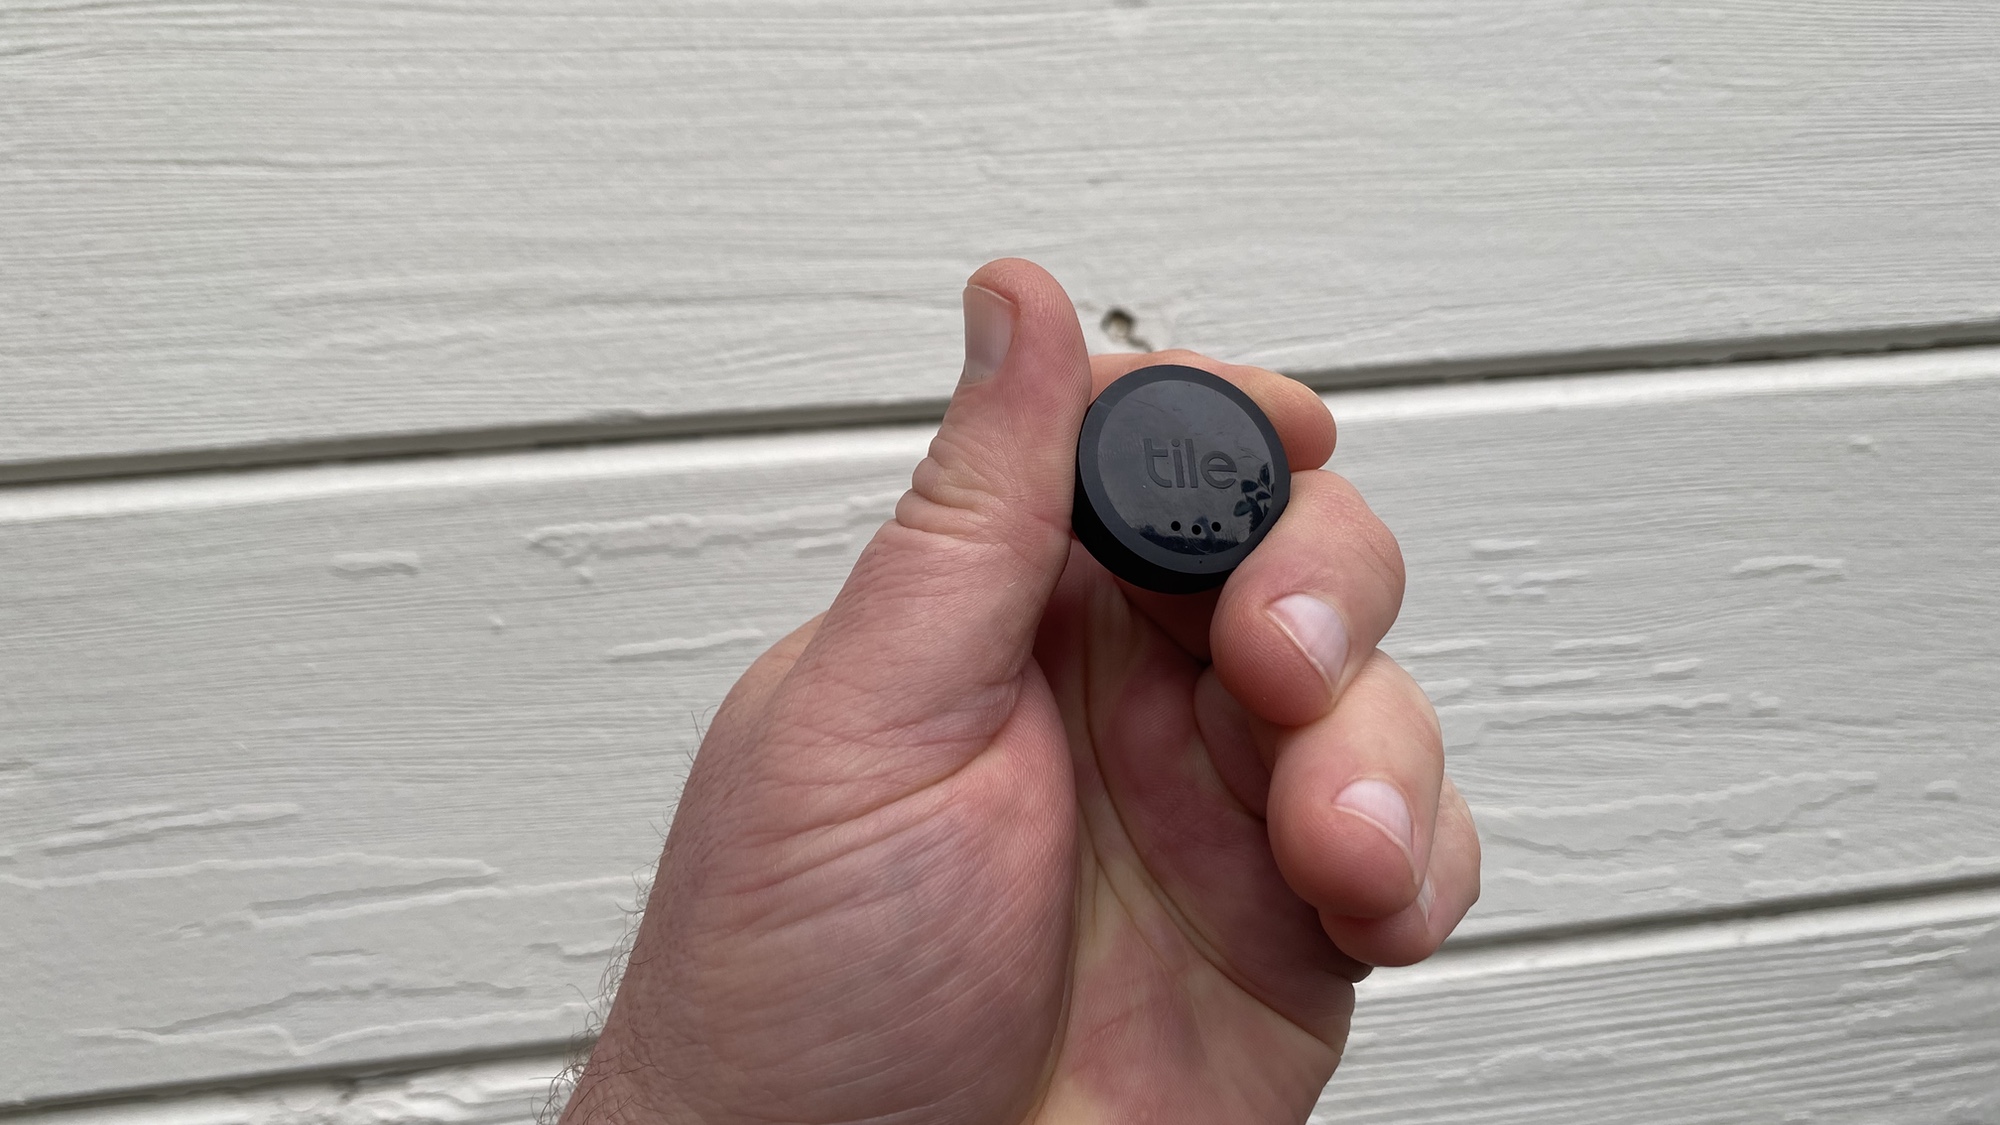 The Tile ultra key finder was supposed to launch this year, so